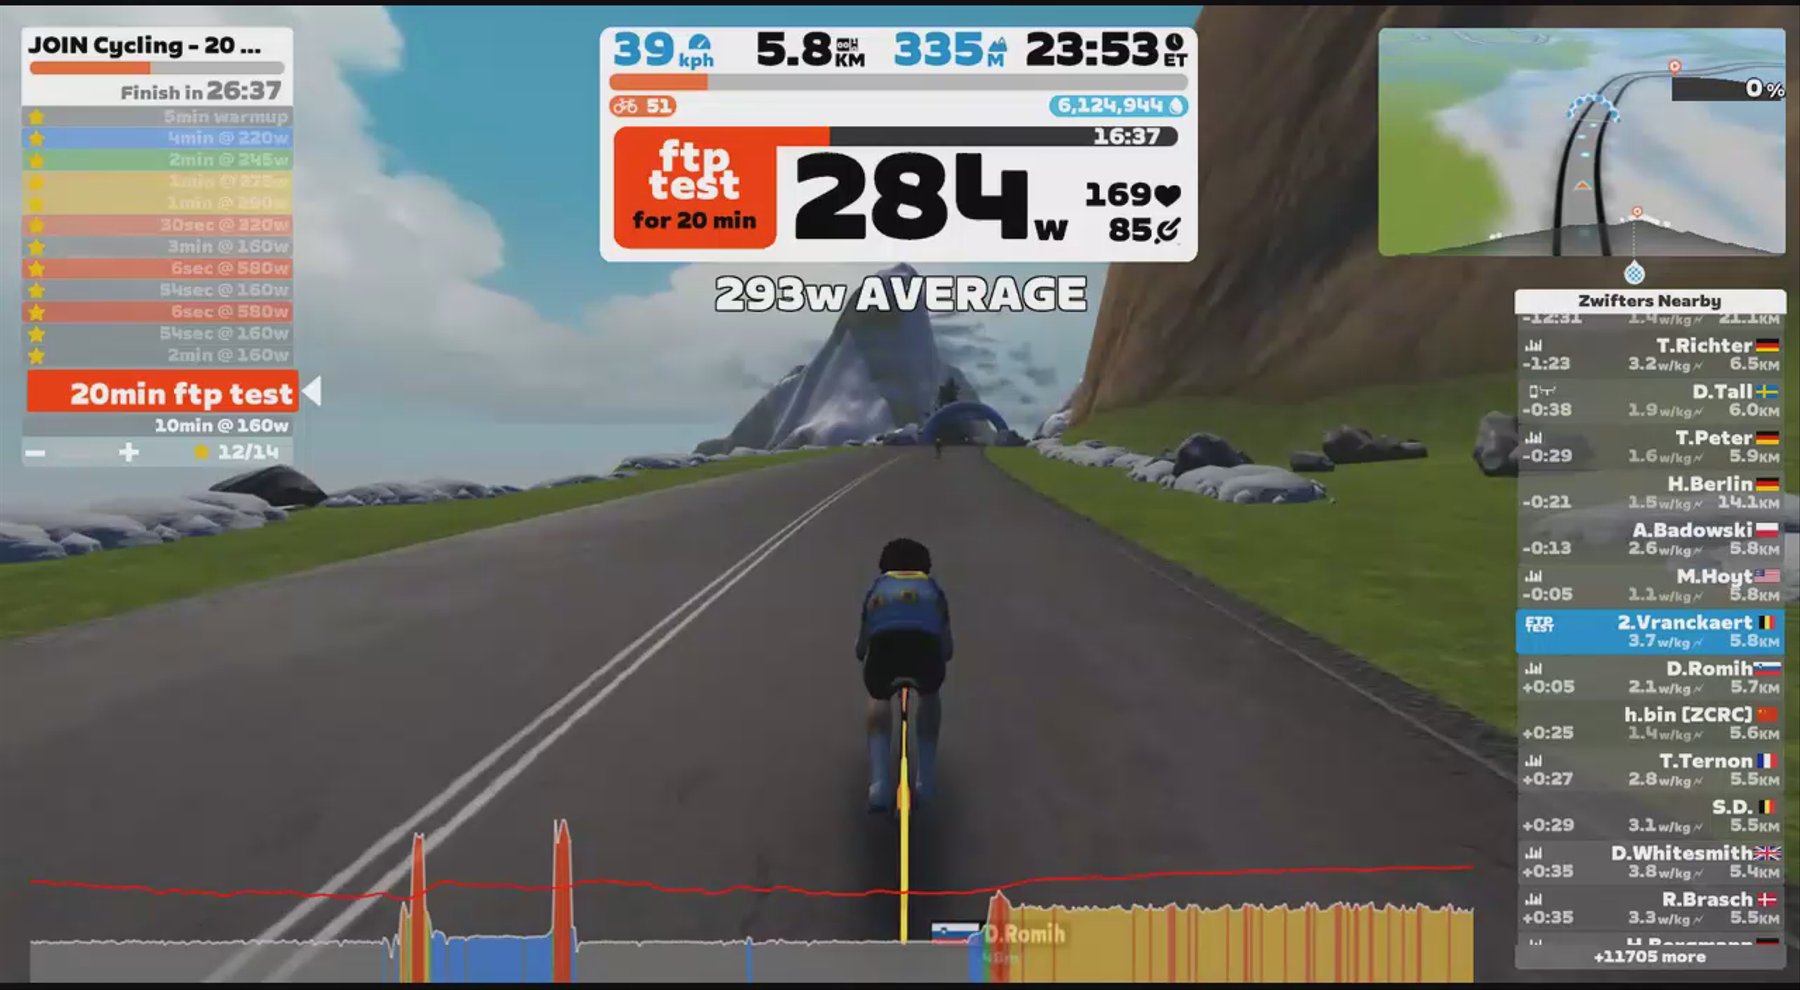 Zwift - JOIN Cycling - 20 min FTP-test in Watopia